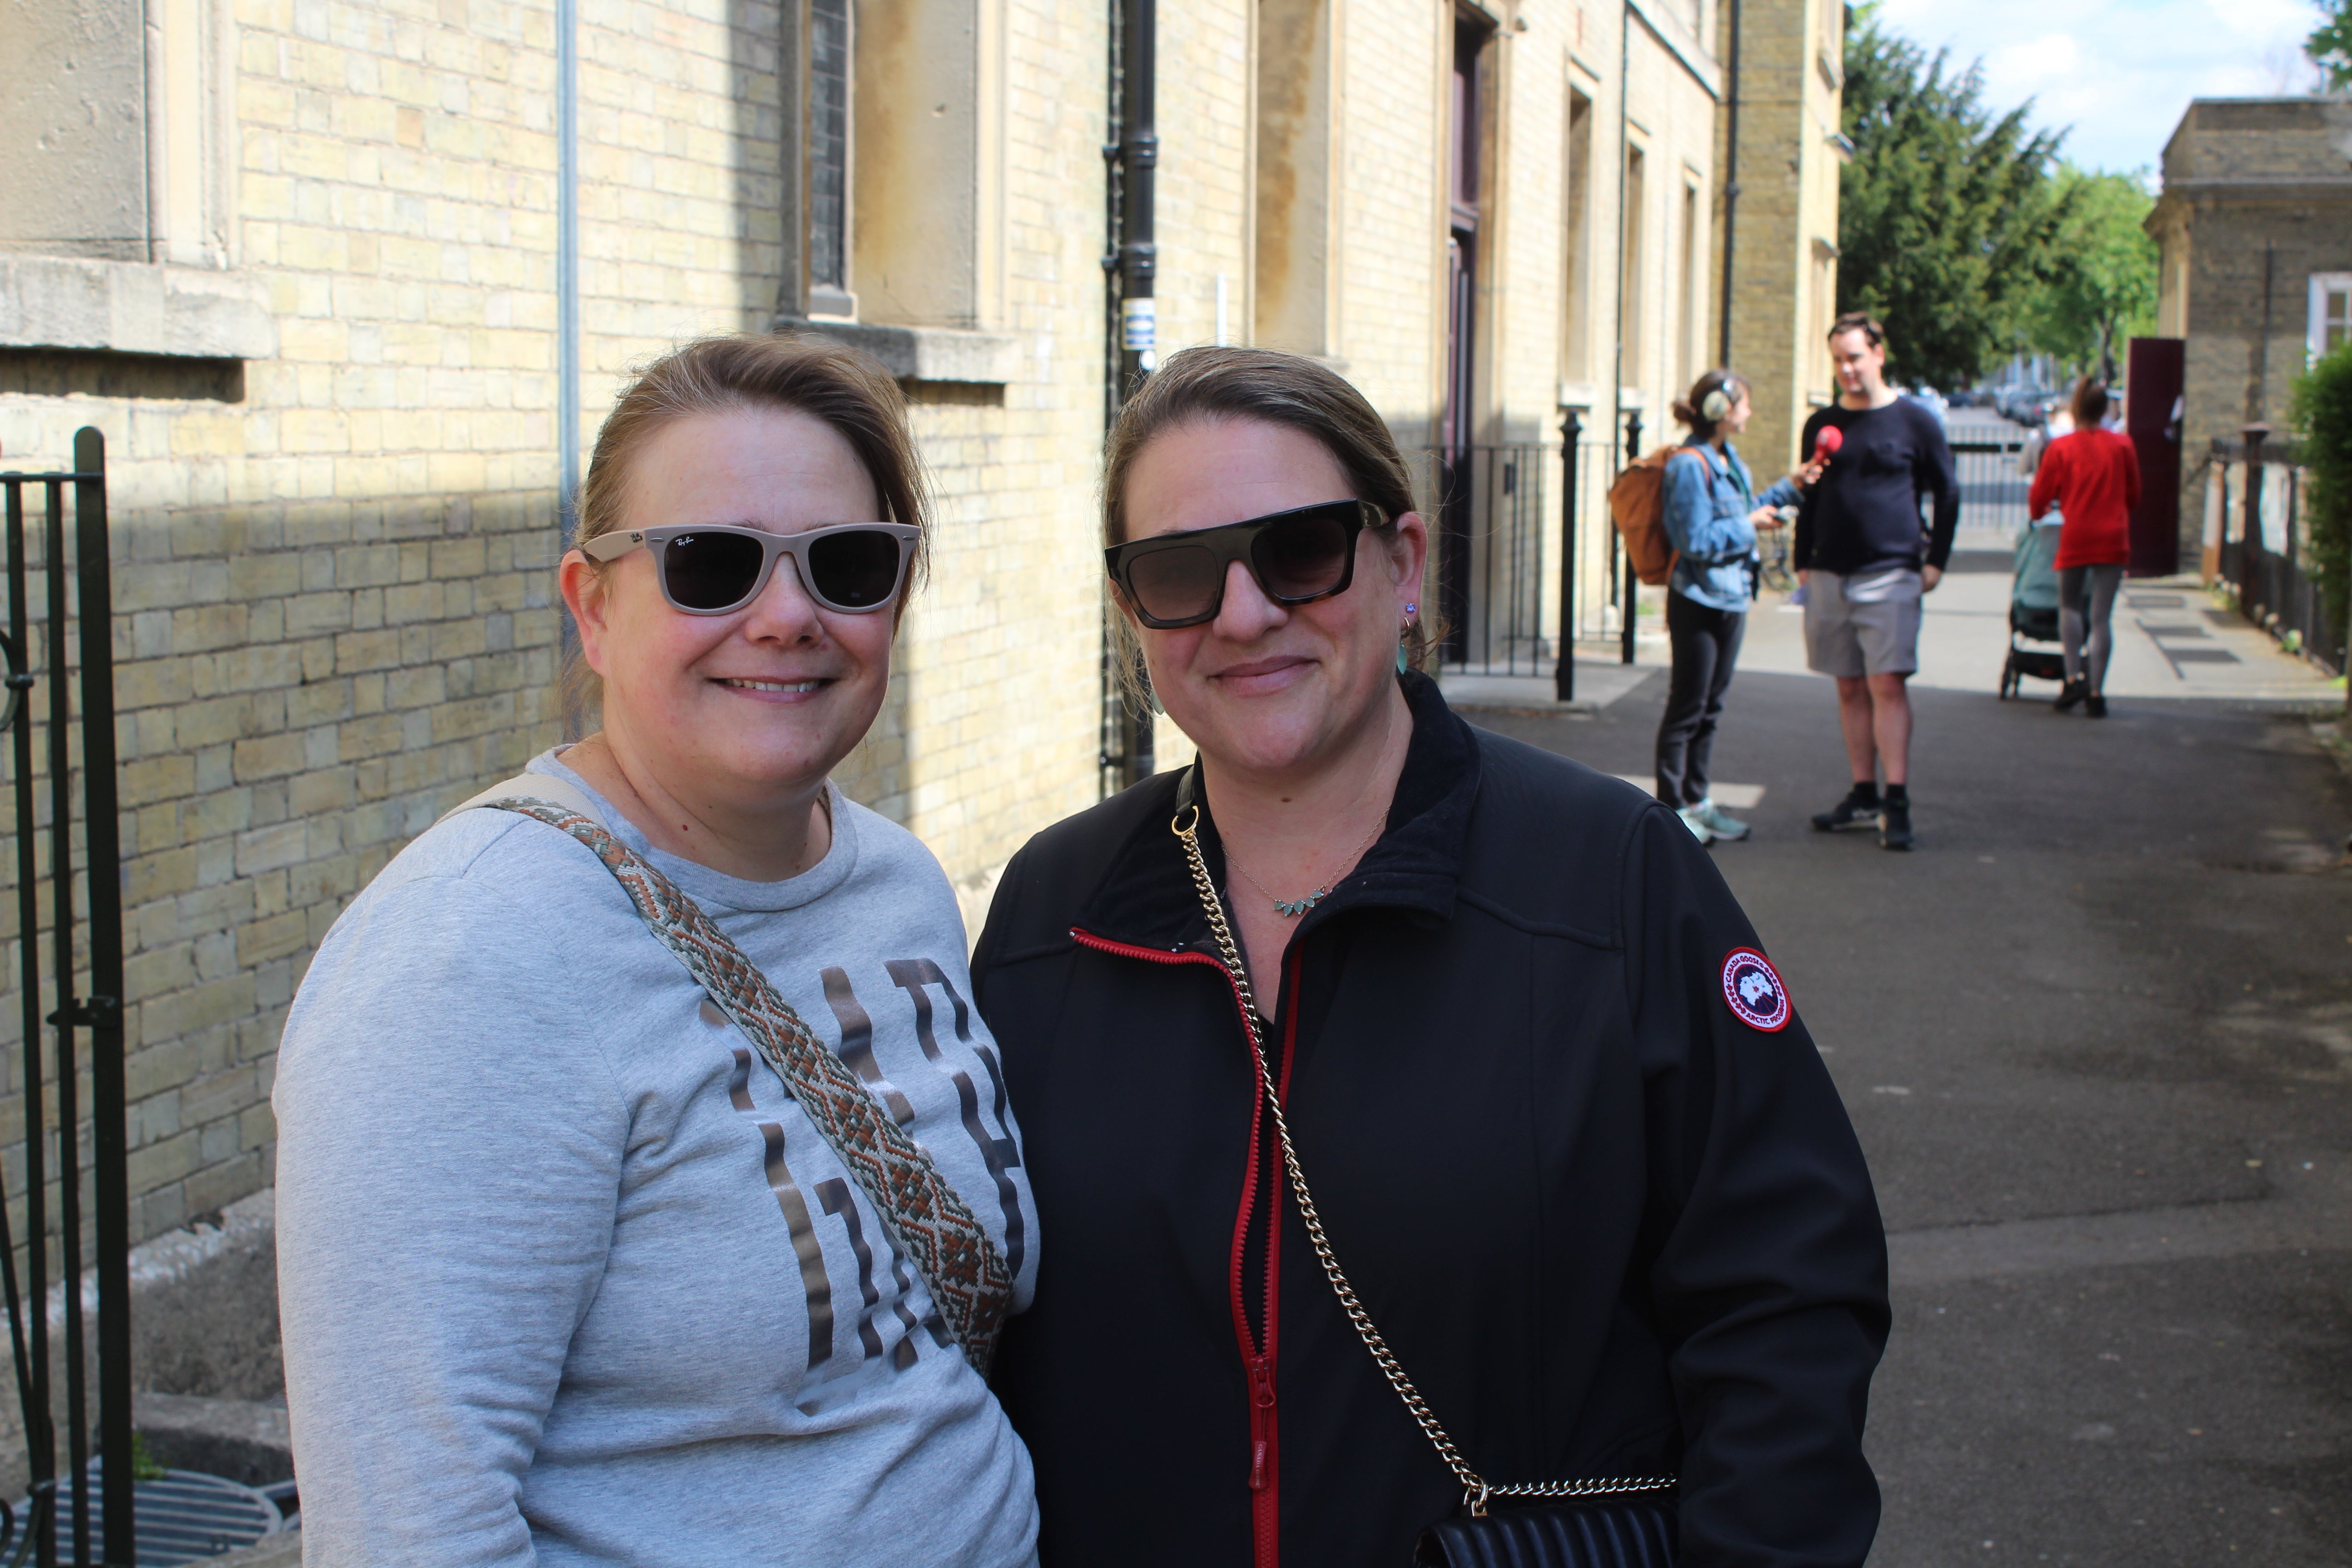 Katia (L) and Helen (R) Themistocleous stand outside a polling station in Wandsworth, London